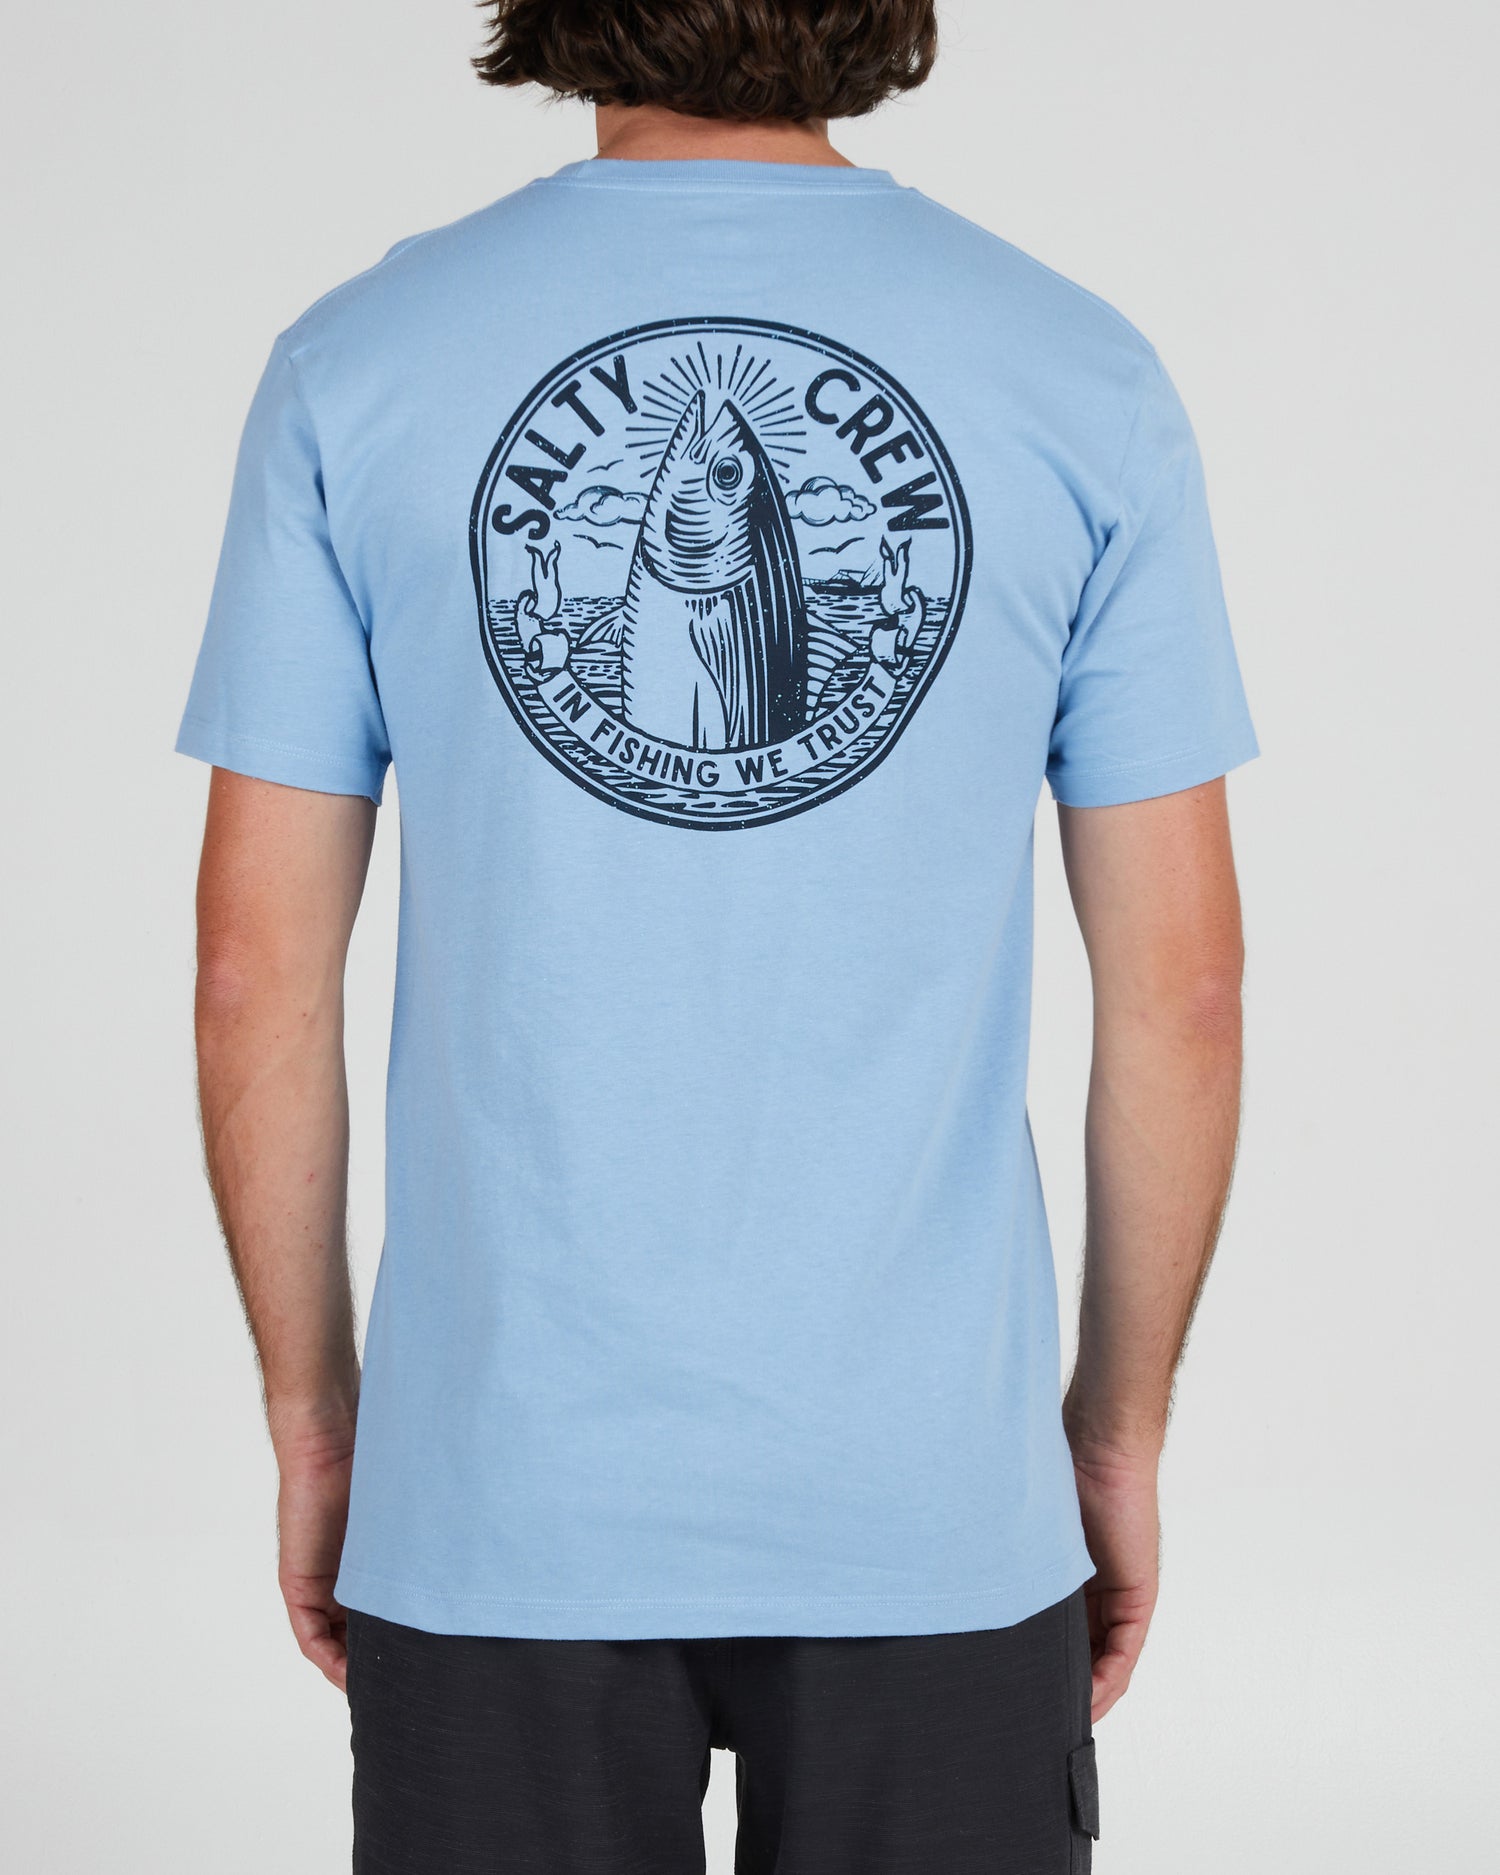 On body back of the In Fishing We Trust Marine Blue S/S Premium Tee